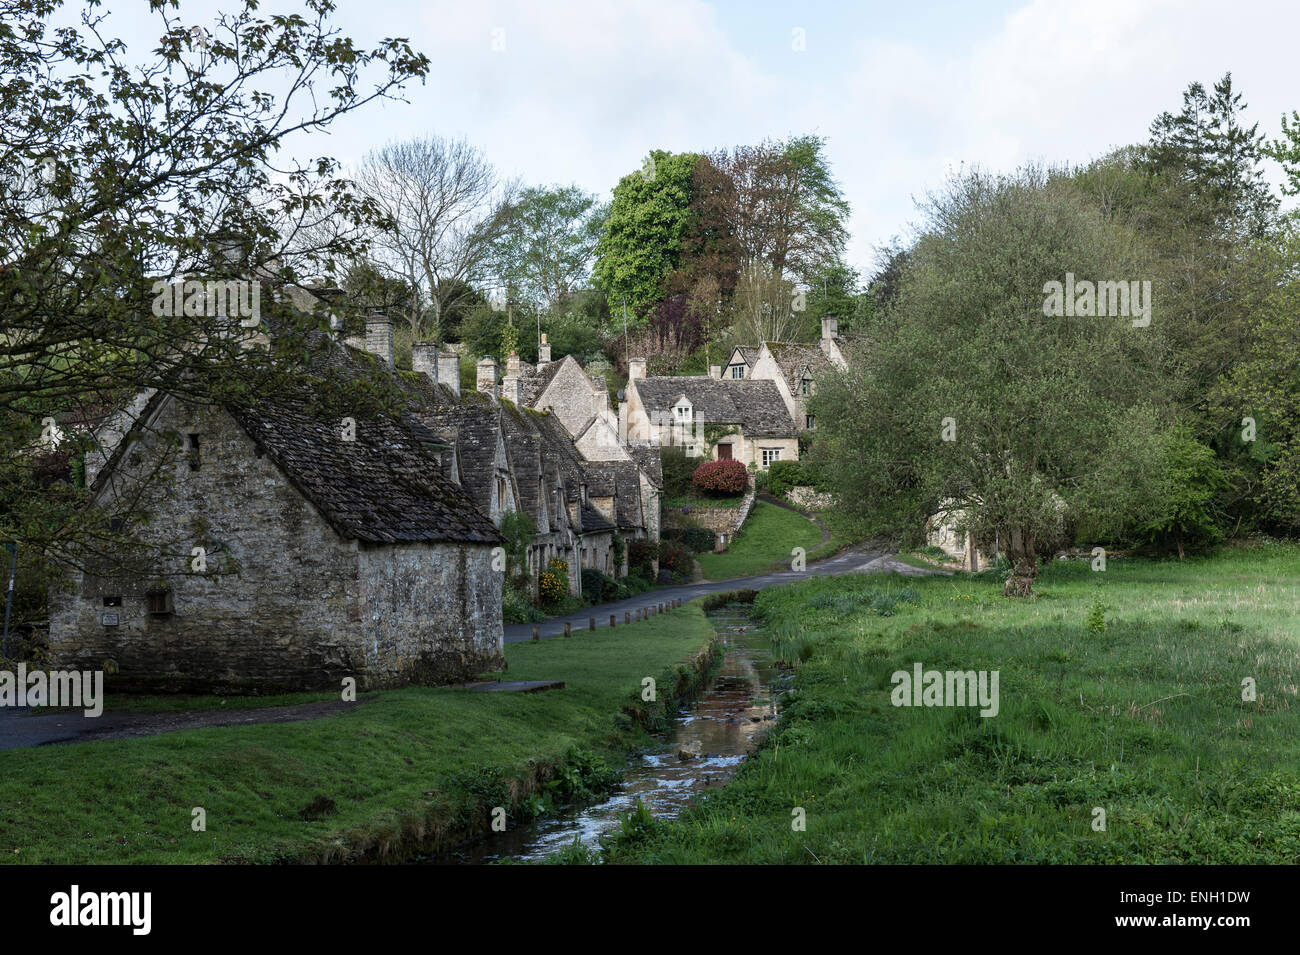 Pictures From The World Famous Village In The Cotswolds Called